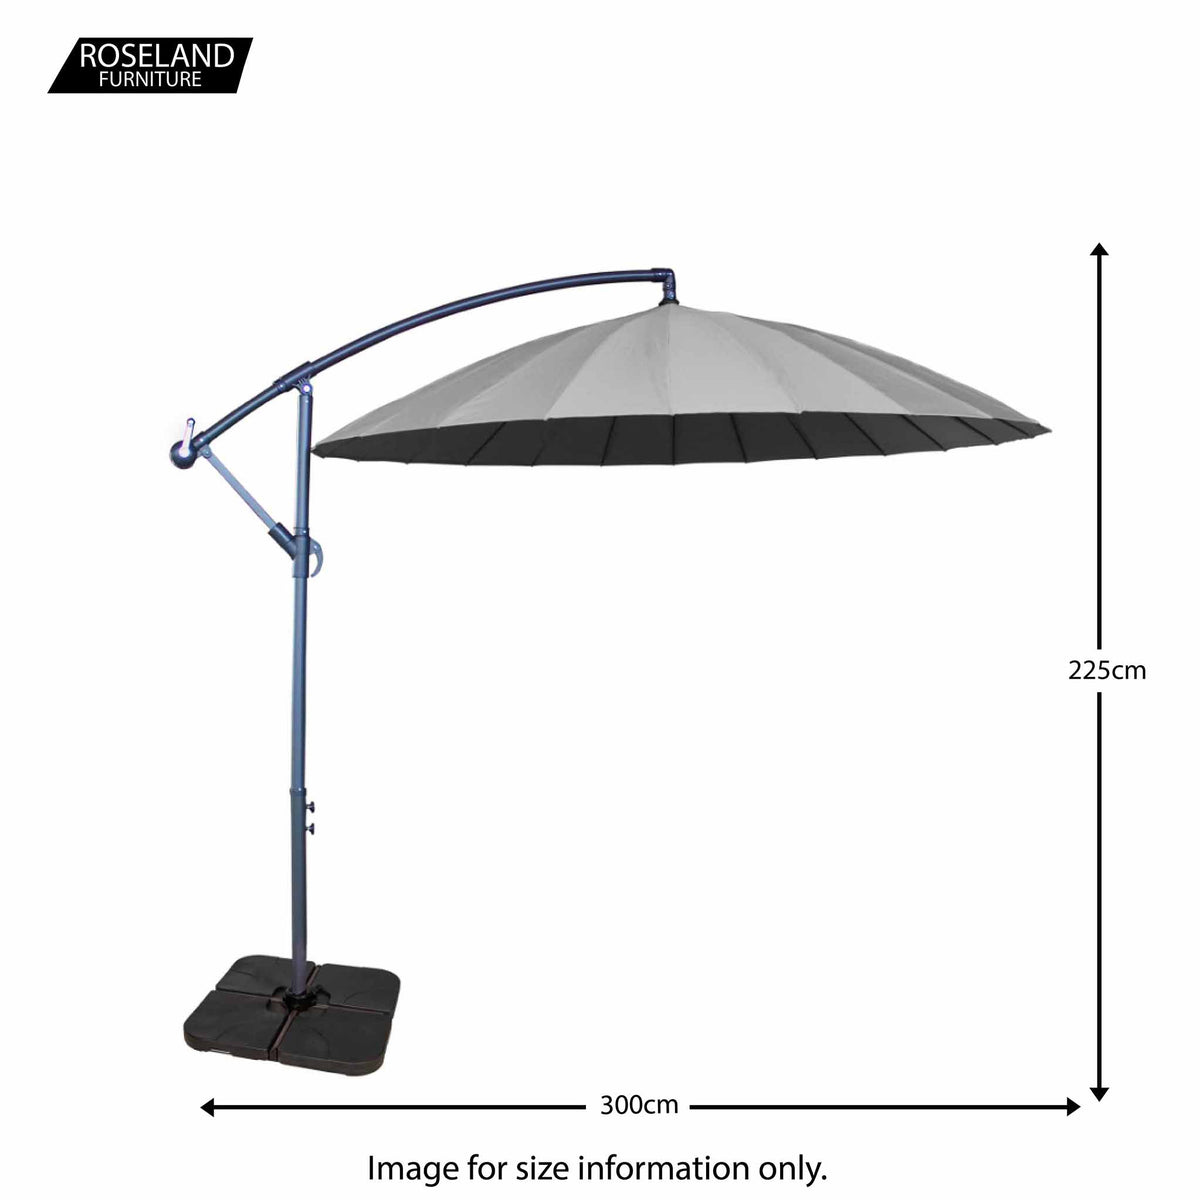 3m Shanghai Cantilever Parasol in Grey - Size Guide